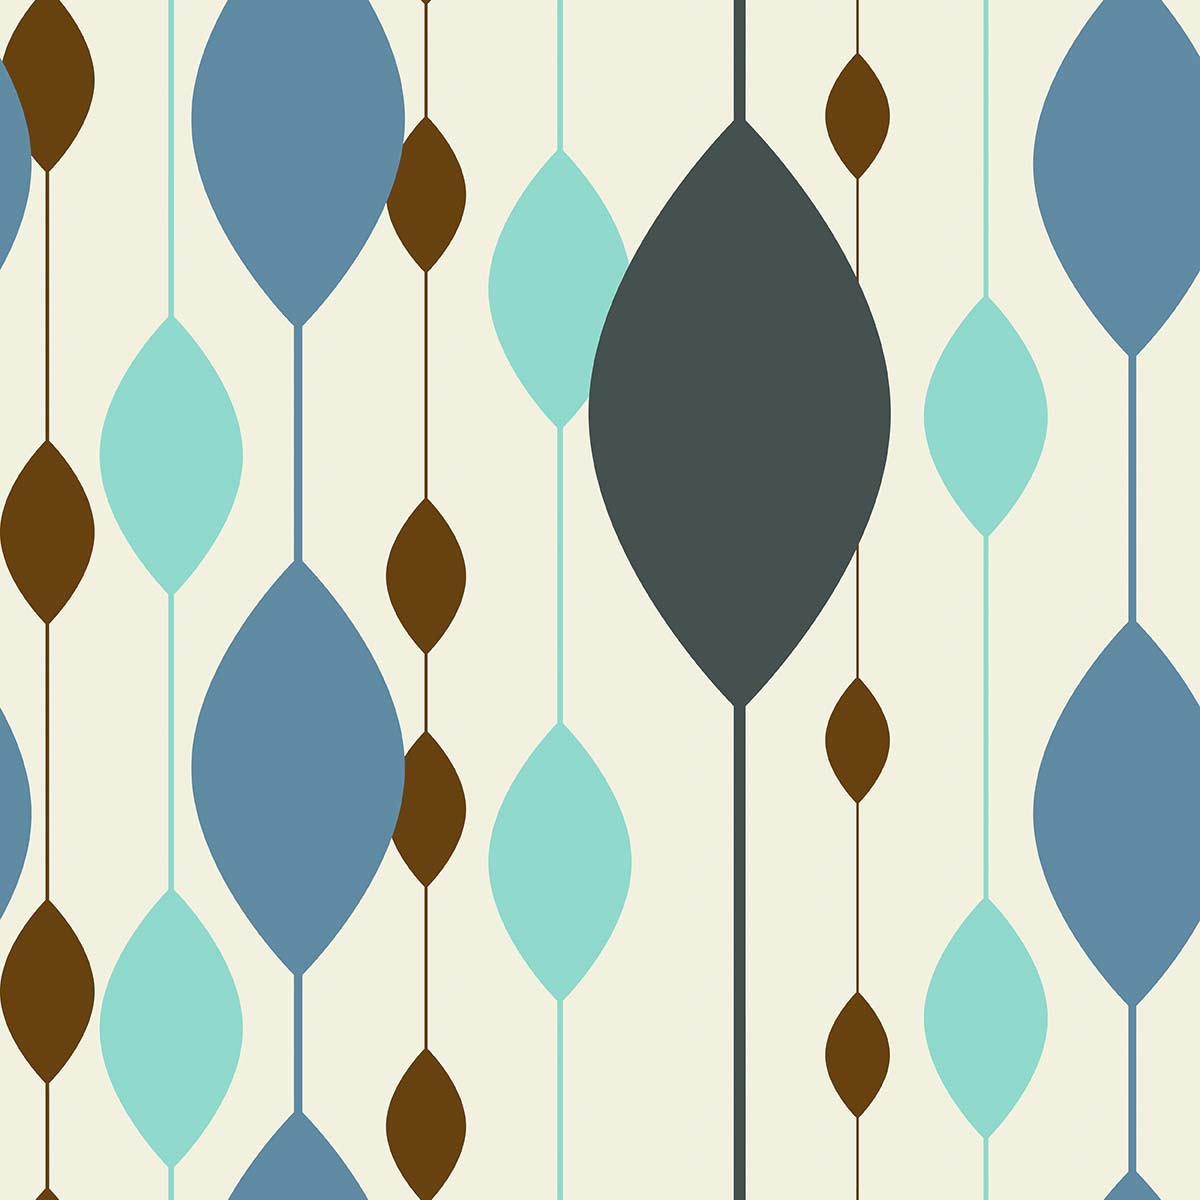 A pattern of blue and brown ovals